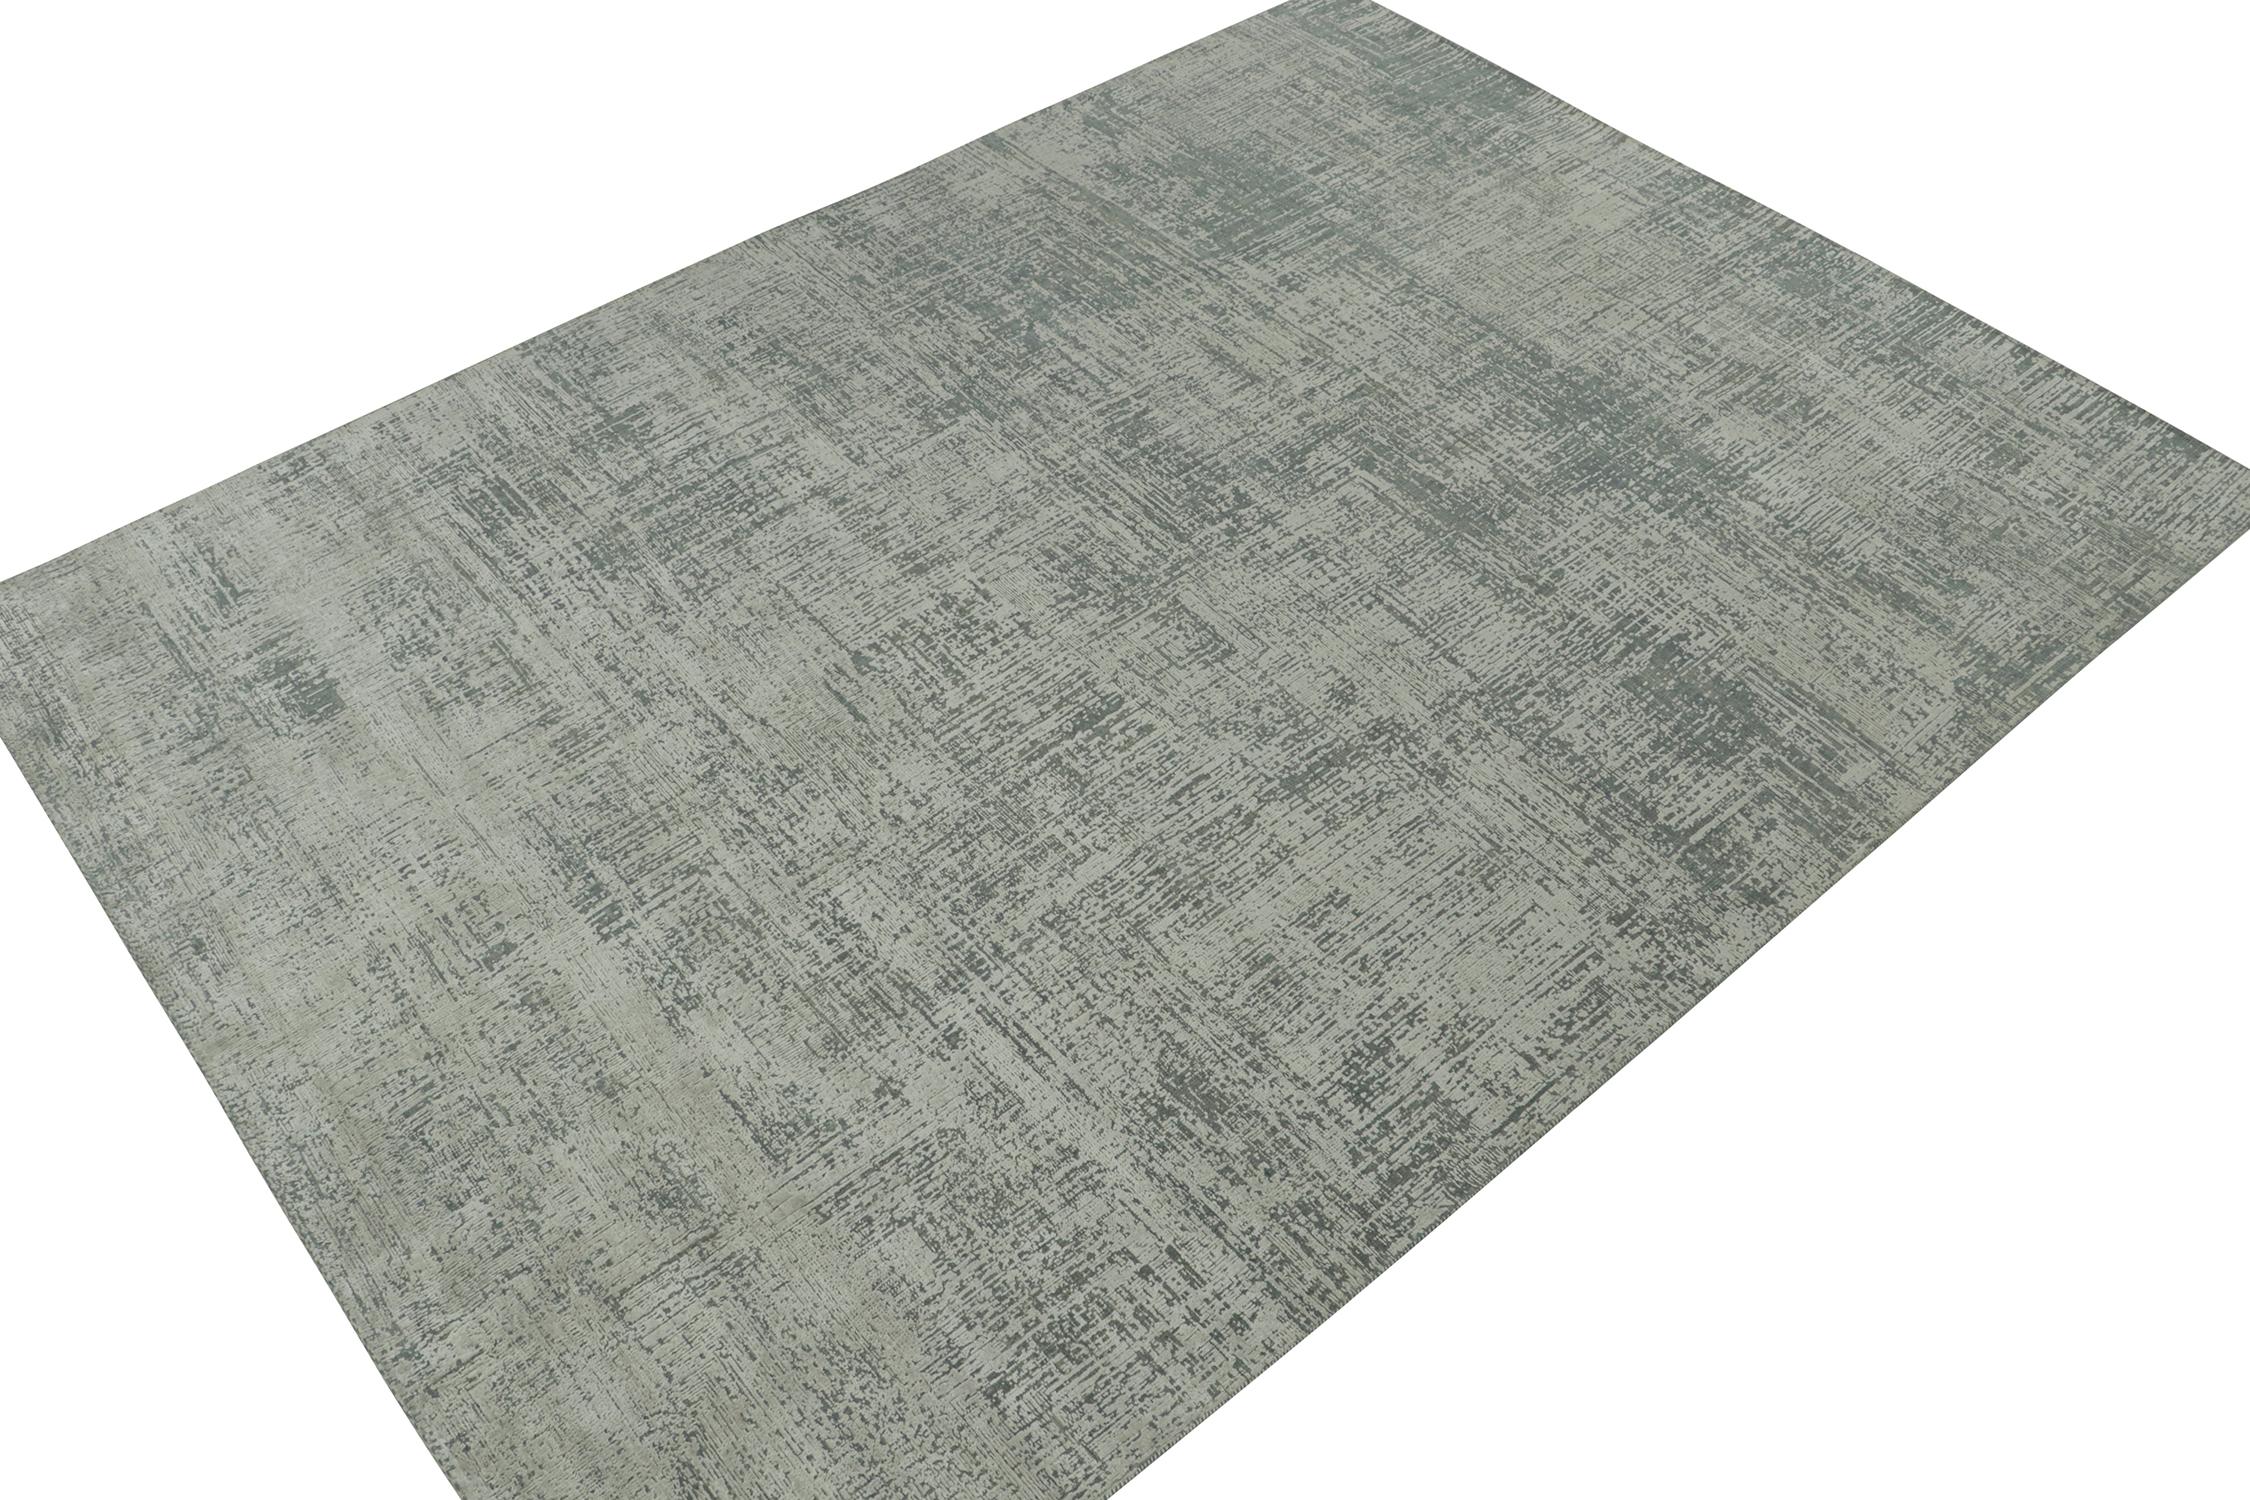 This 9x12 abstract rug is the next splendid addition to Rug & Kilim’s bold modern rug designs. Hand-knotted in wool and silk.
Further on the Design: 
This piece enjoys geometric streaks in gray and stone blue accents, and a gorgeous sense of